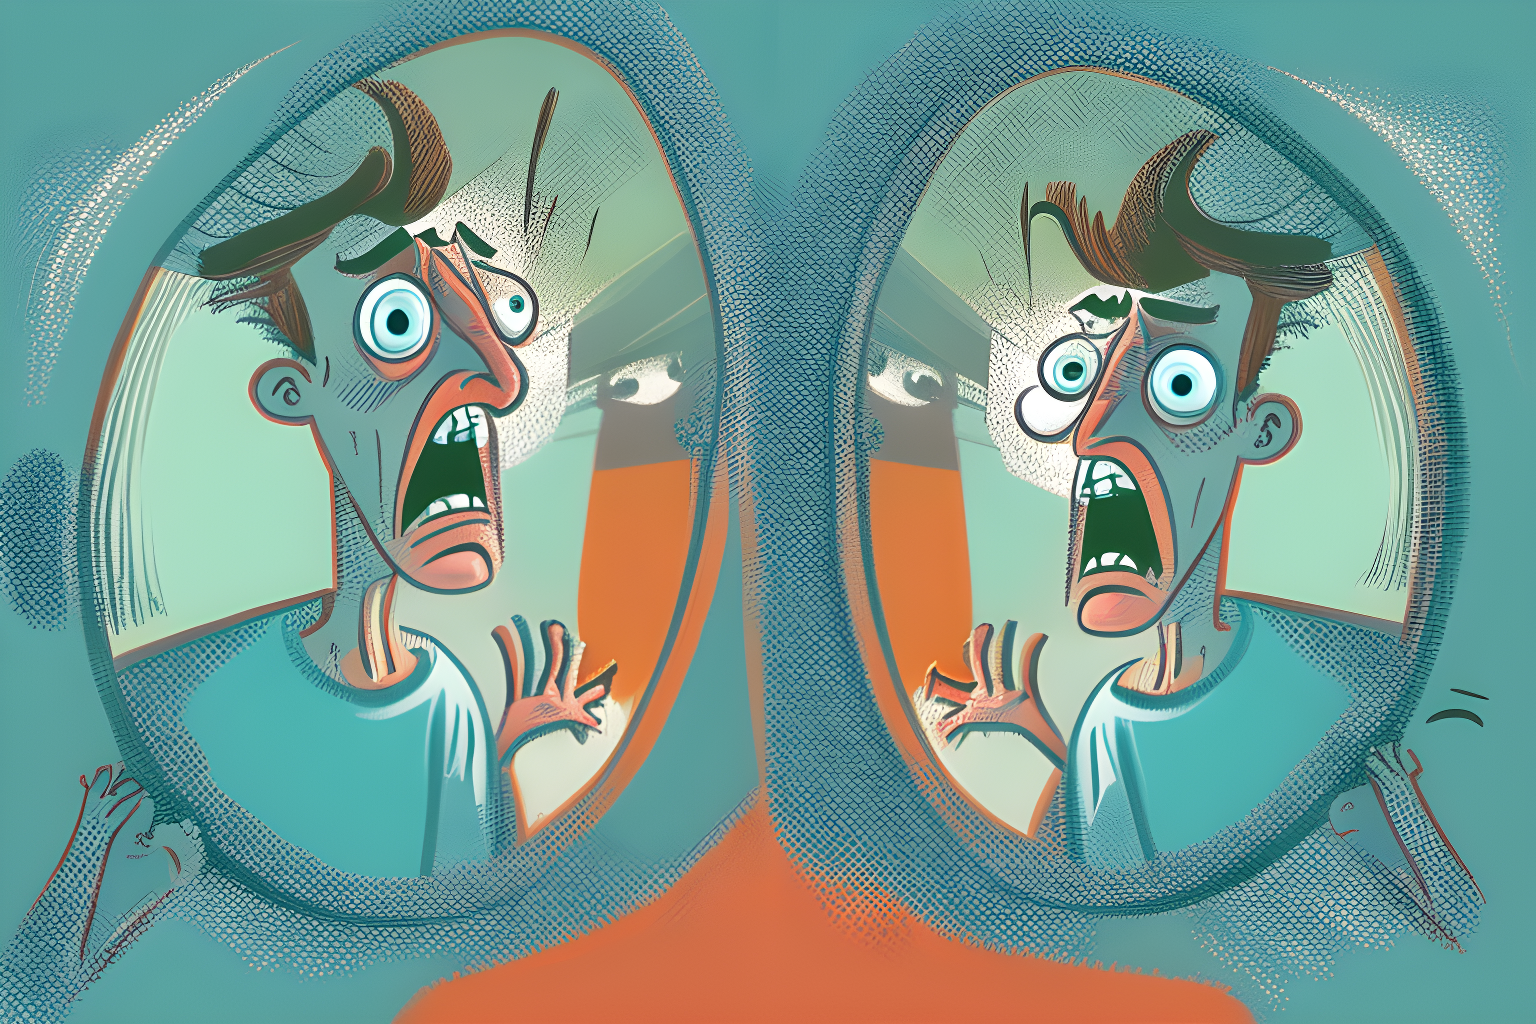 Illustrate a cartoonish man looking into a mirror and being shocked to see a different face